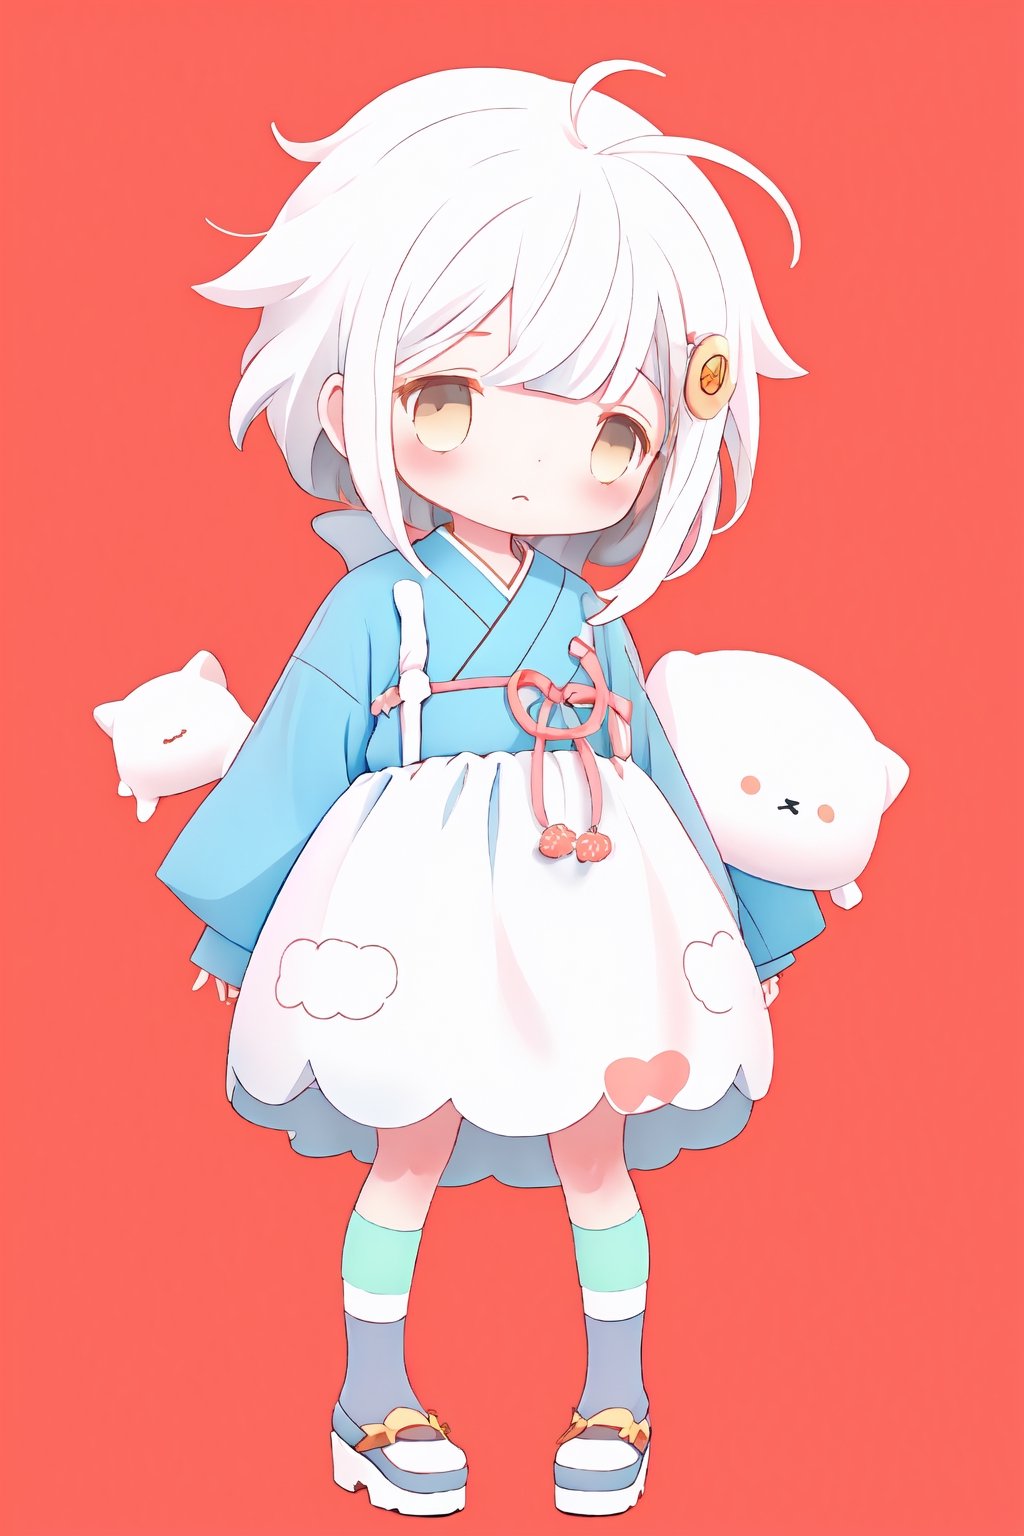 style of Chiho Aoshima, adorable, cute, a girl, white hair, puffy dress, full body, warm colors, simple white background, in clouds, Illustration, cover art, japan, minimalistic, eguchistyle,toitoistyle